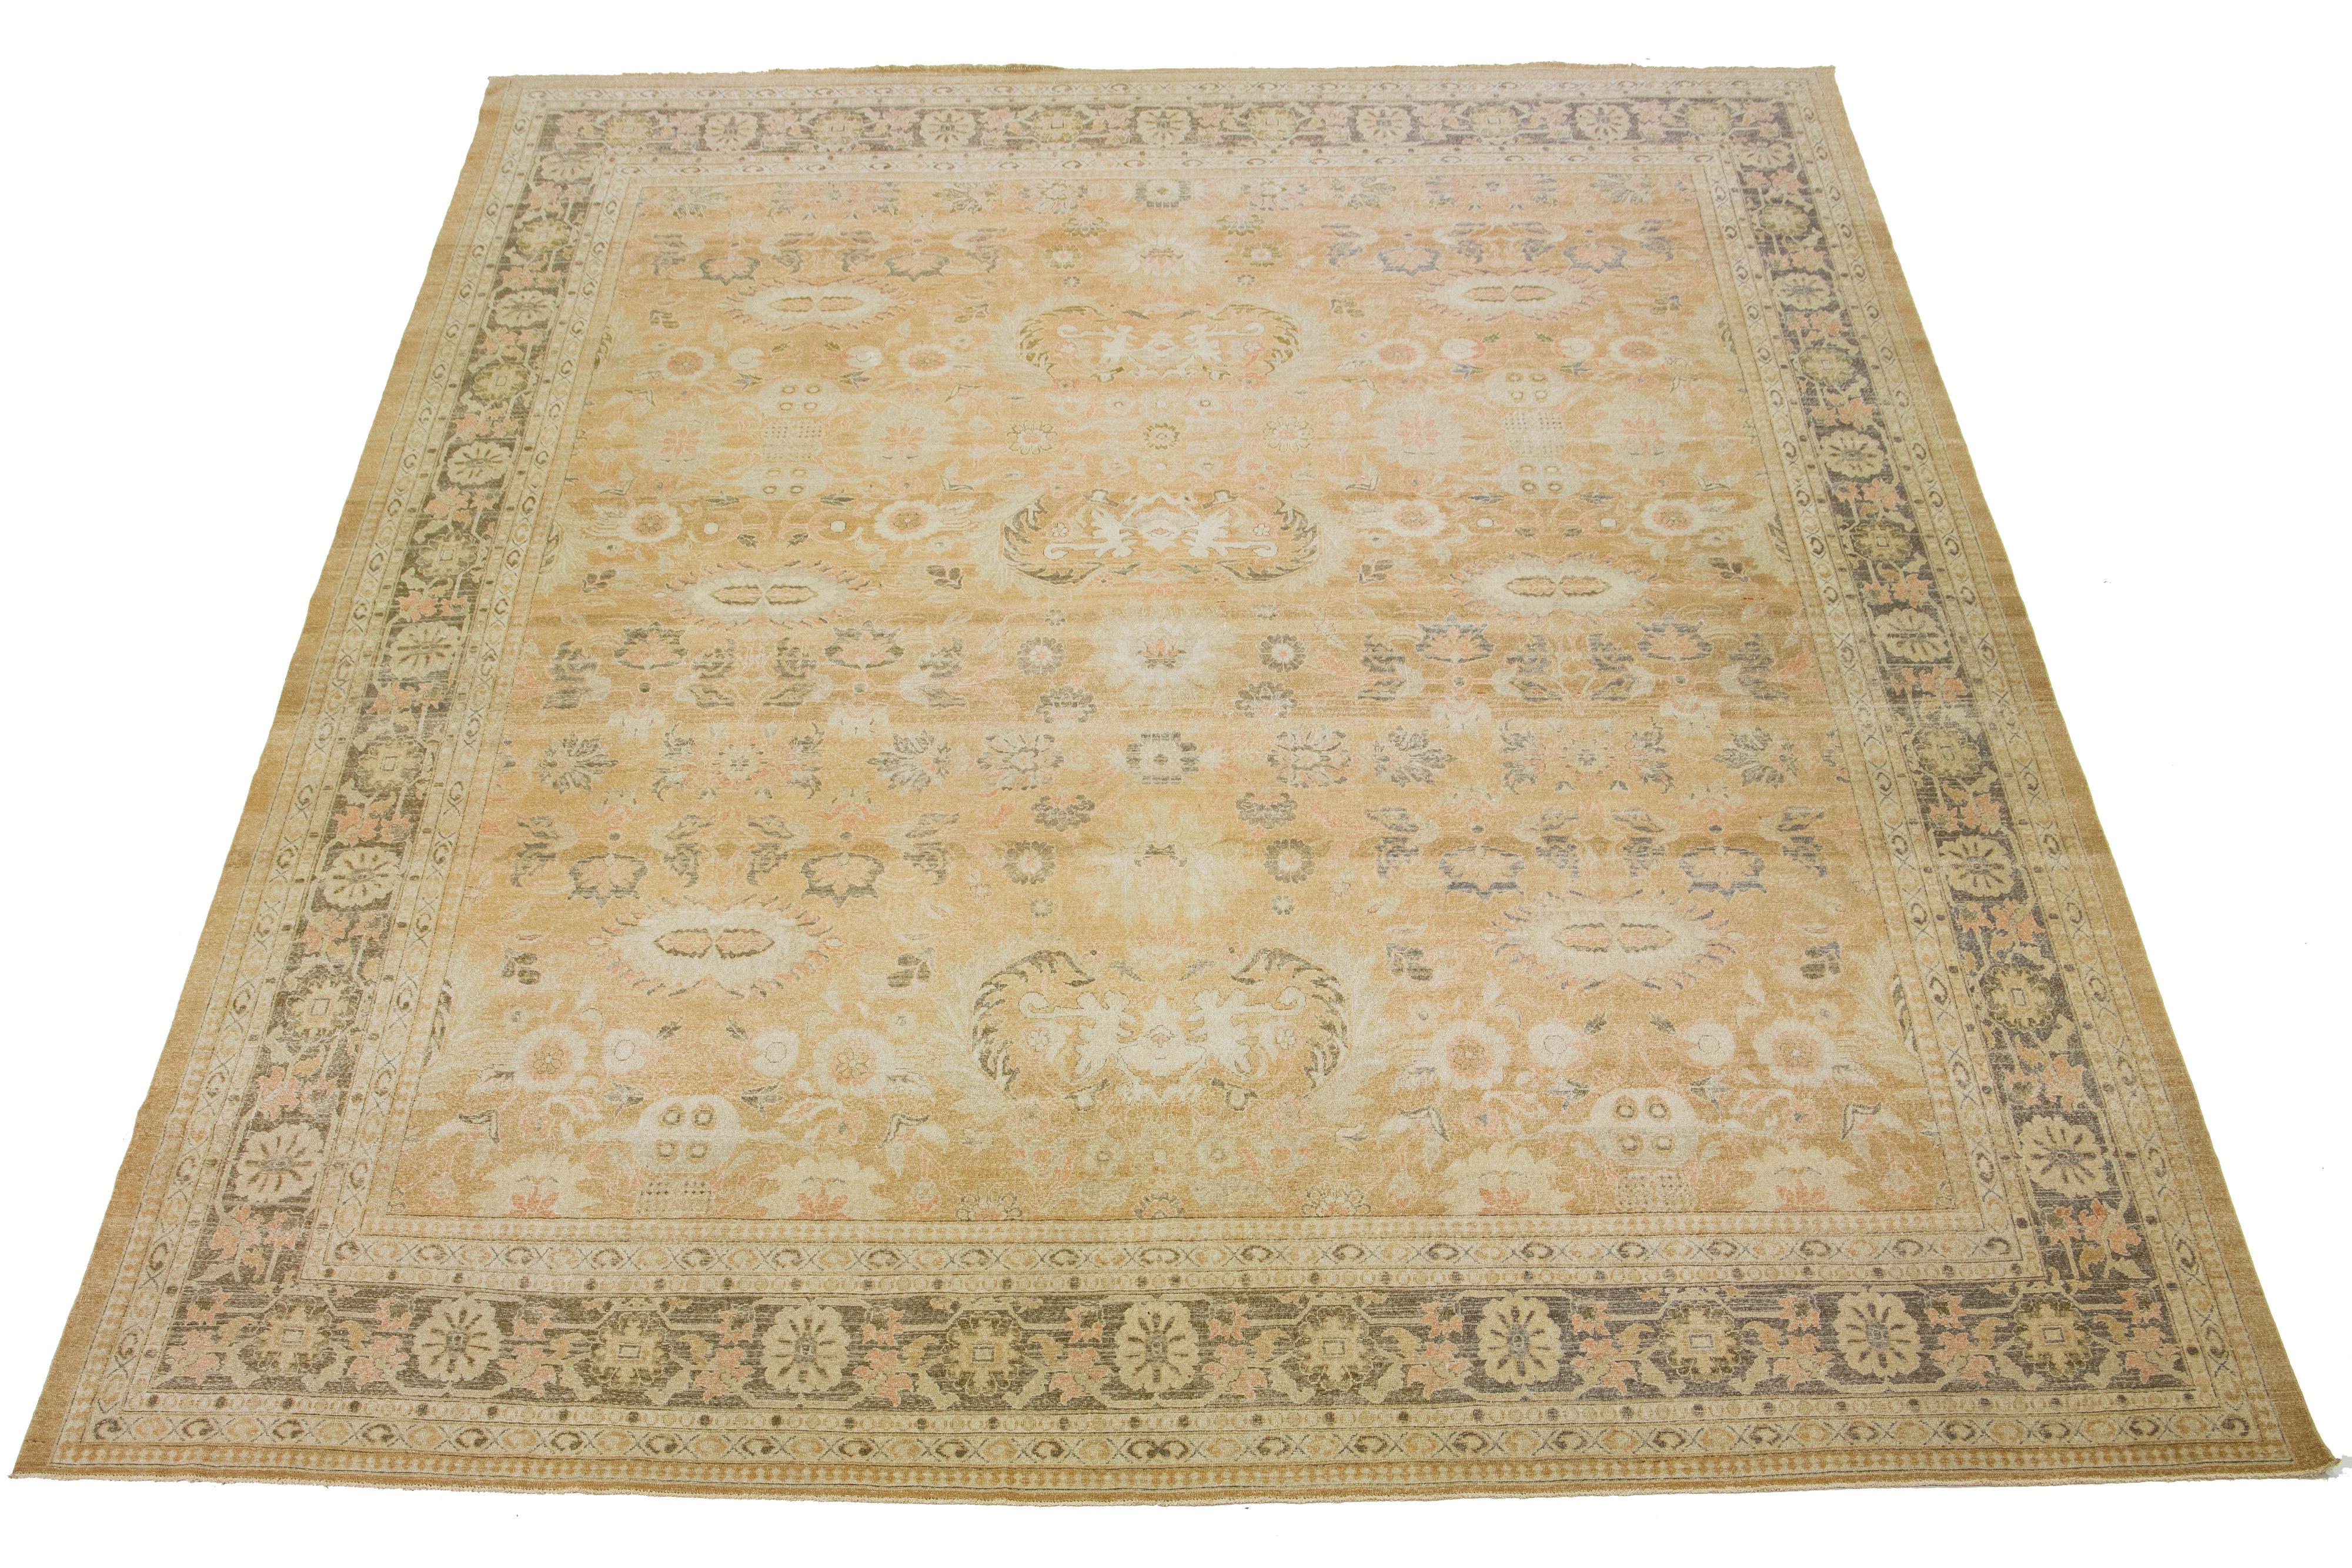 Beautiful Turkish Sivas hand-knotted wool rug with a tan-brown field. This piece has a gray-designed frame and accents in a gorgeous allover classic floral design with green, beige, and terracotta hues. 

This rug measures 13'6